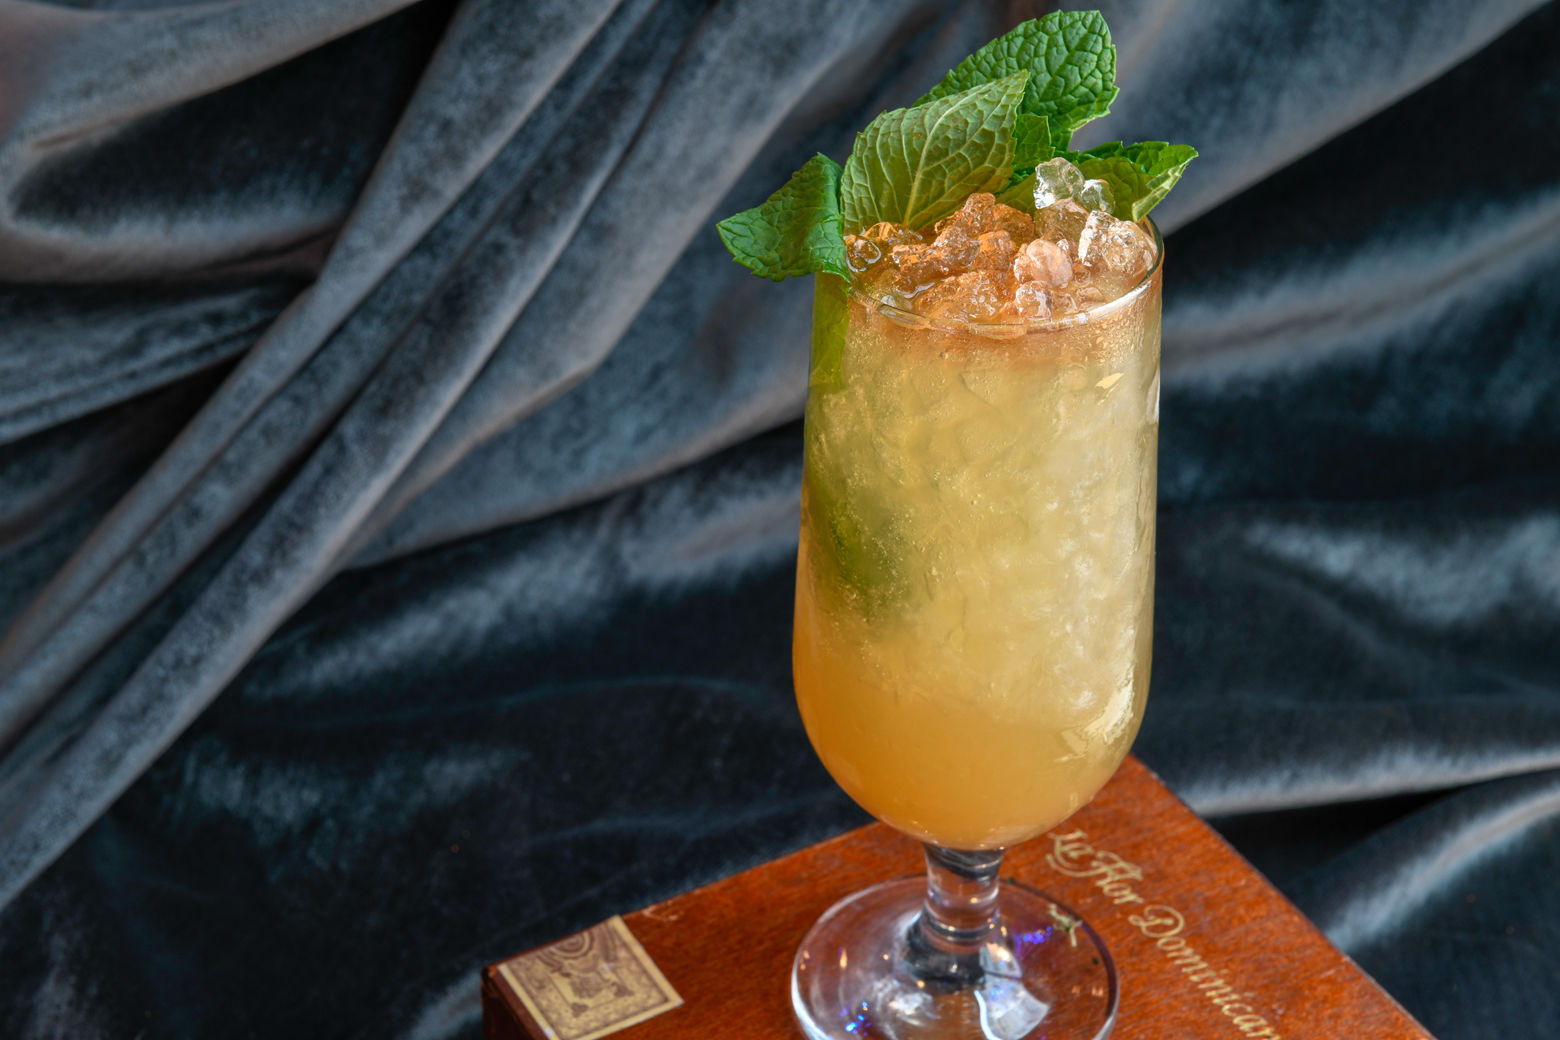 Dirty Habit, the bar at the Hotel Monaco in Penn Quarter, has a peach julep brunch punch for Derby day. (Raquel Sharma for Kimpton Hotels)